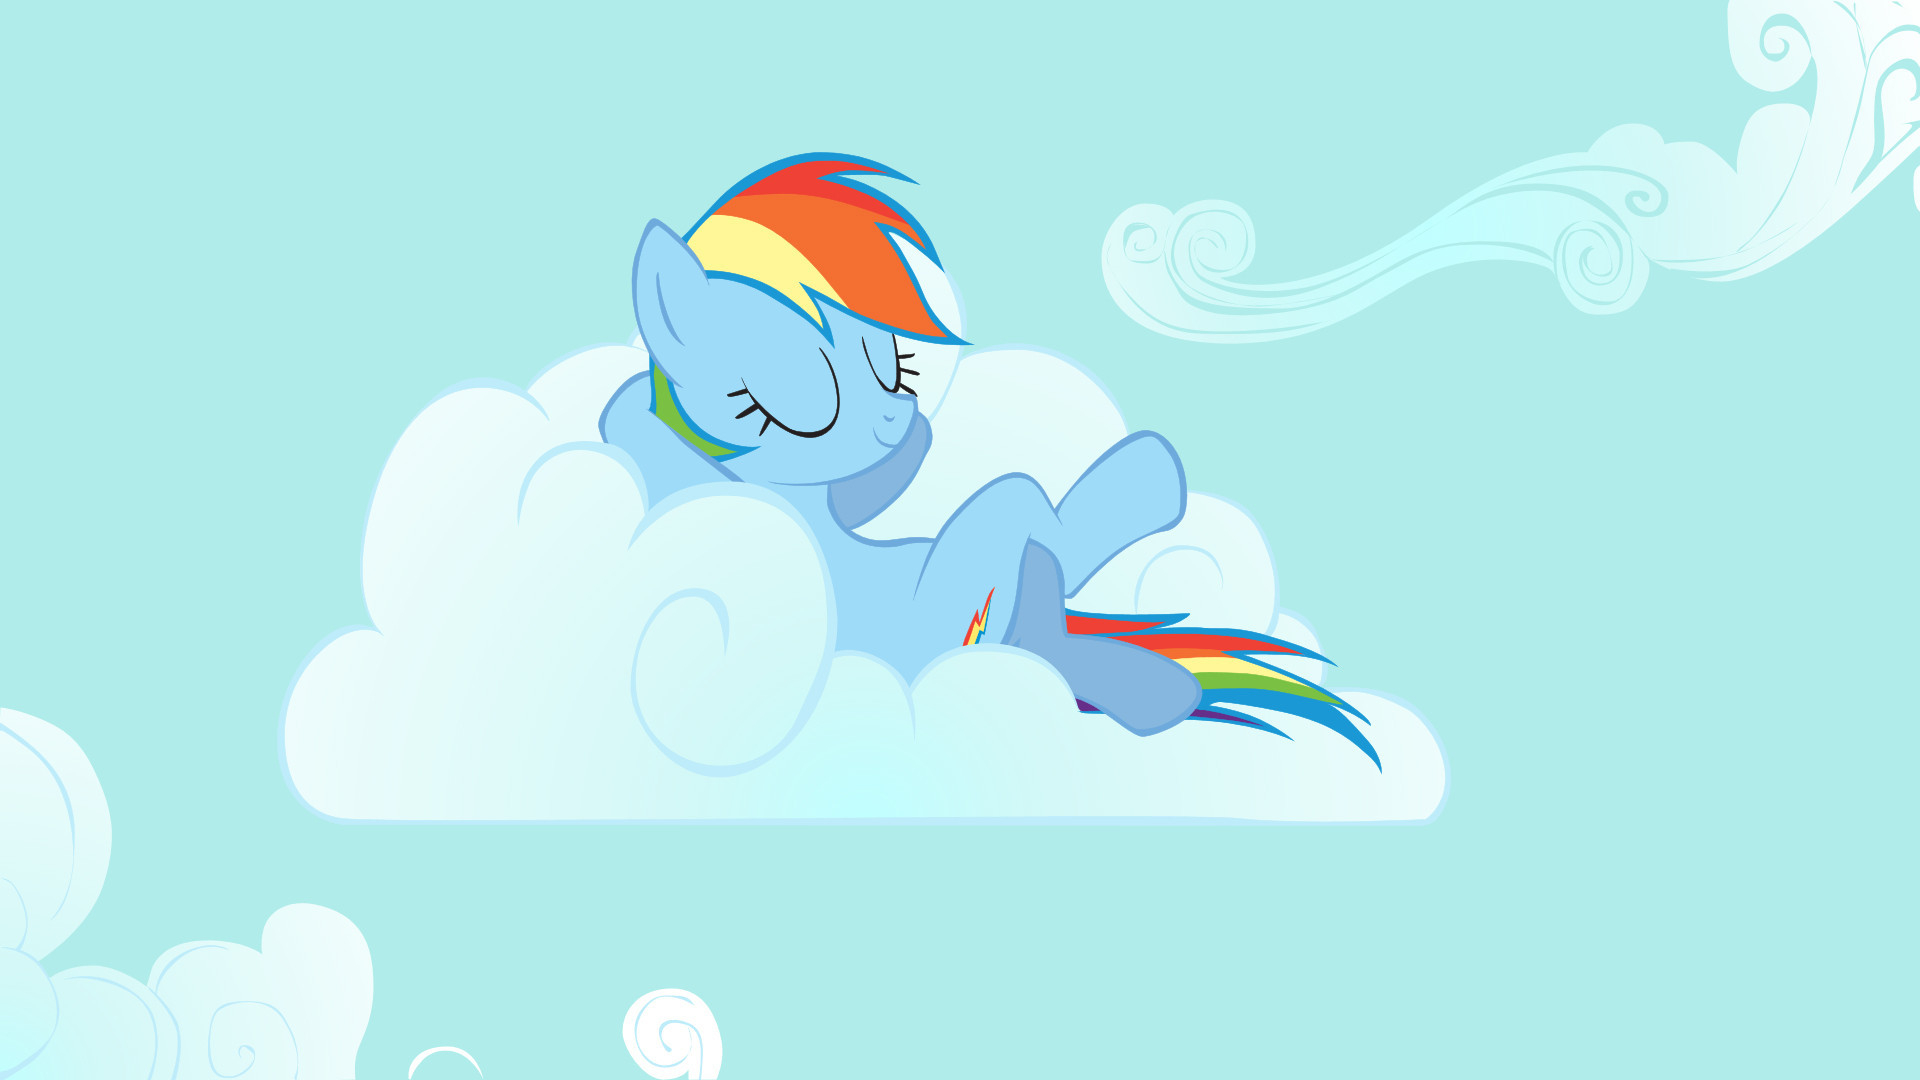 1920x1080 330+ Rainbow Dash HD Wallpapers and Backgrounds